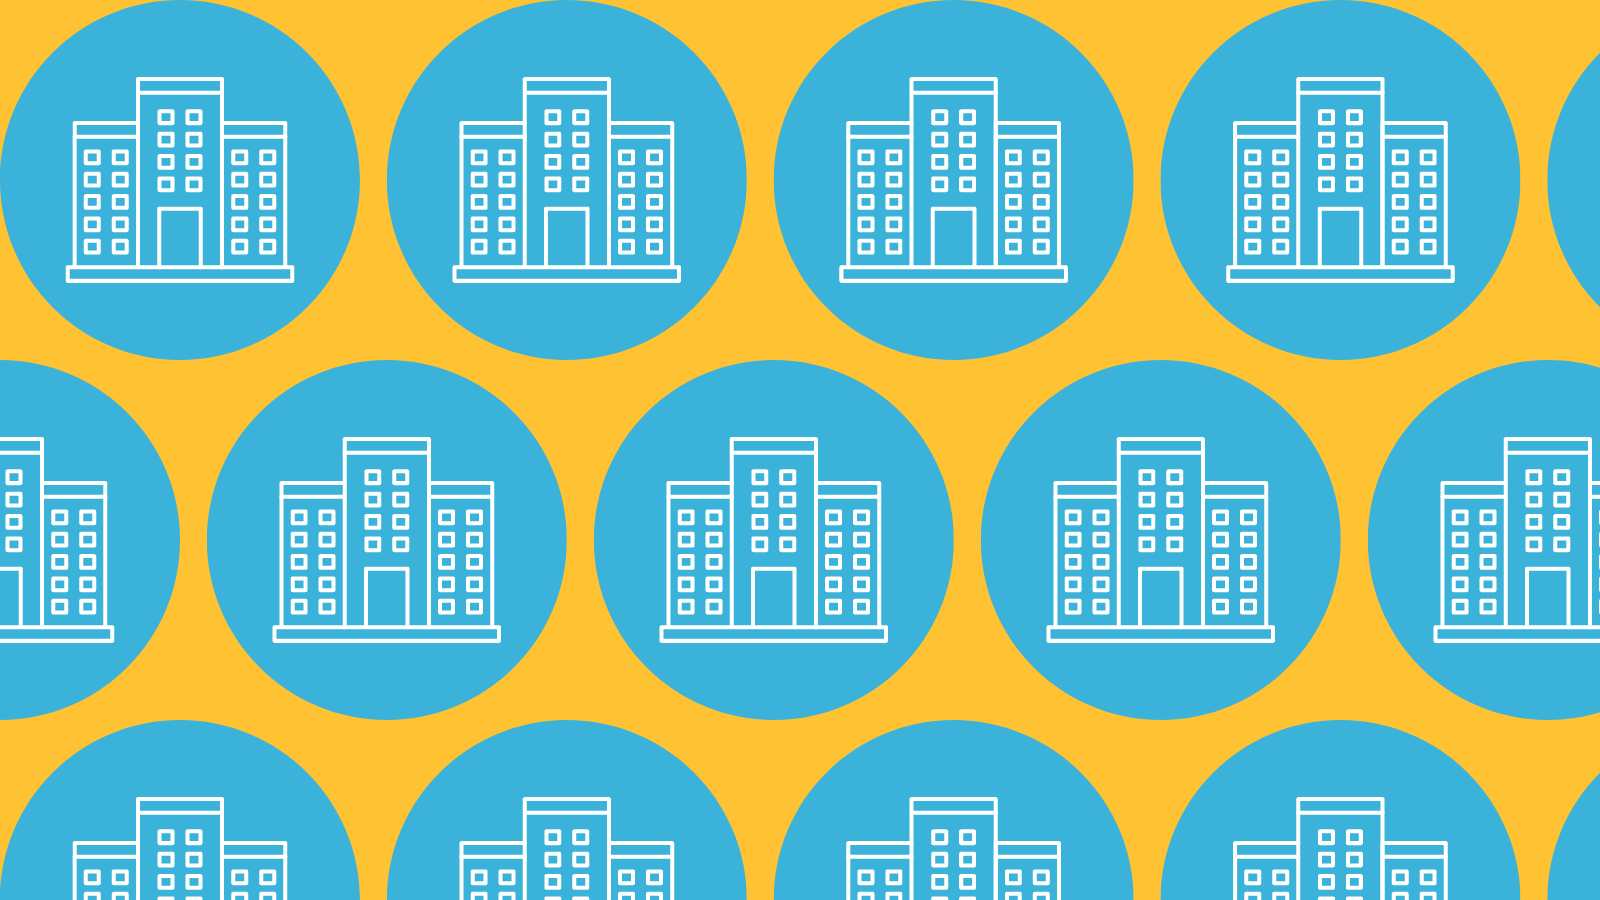 A repeating pattern of office buildings in circles